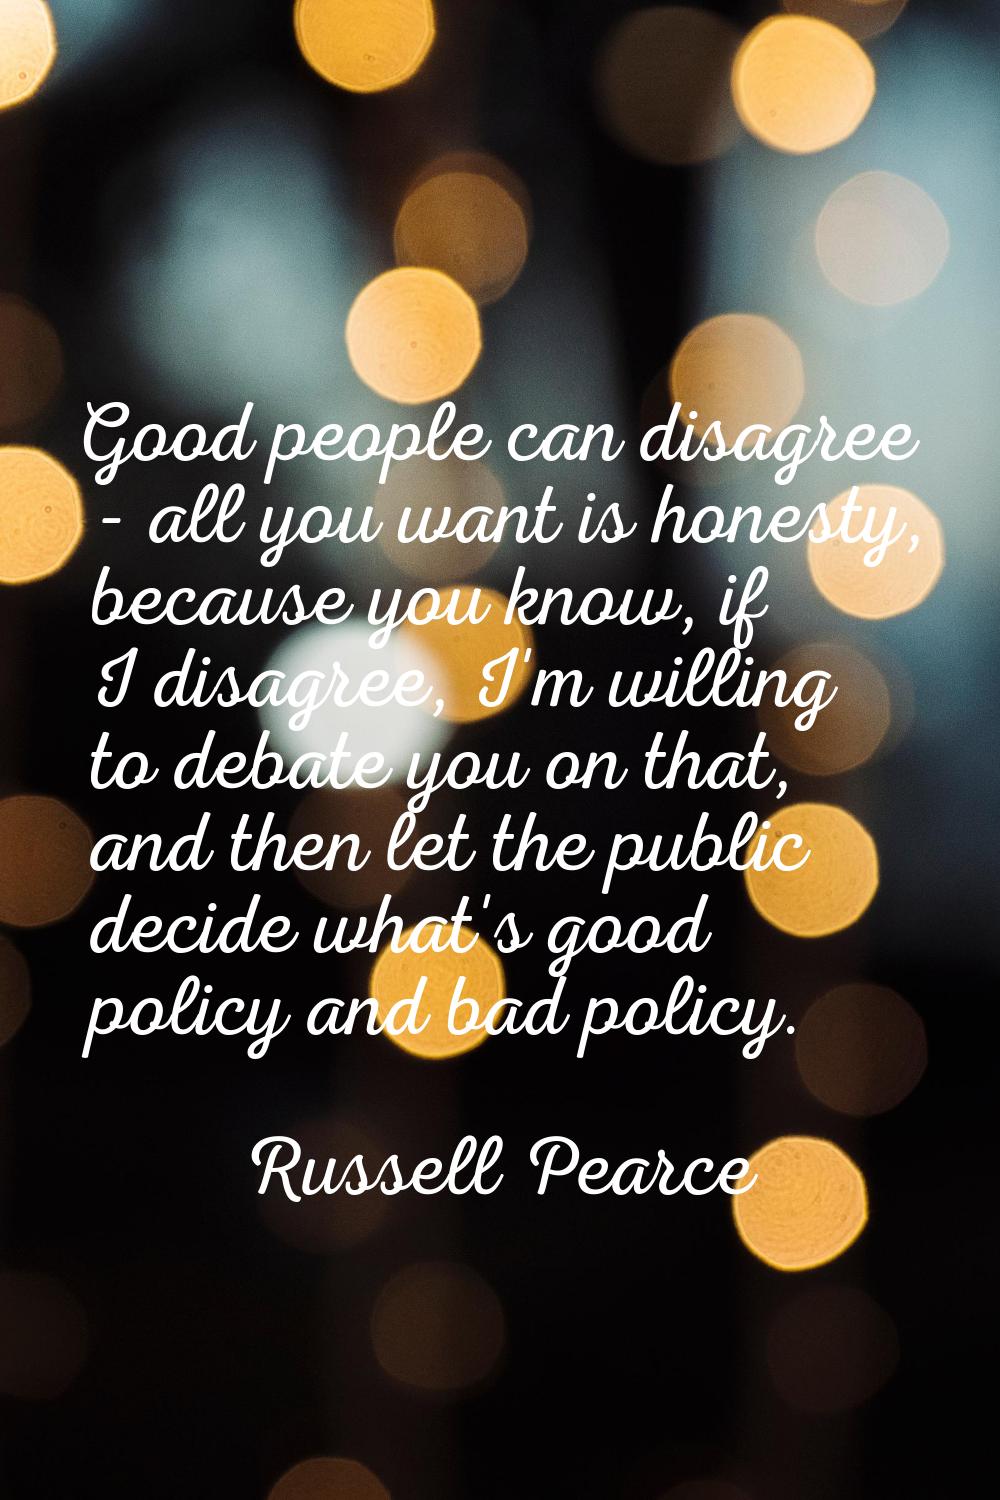 Good people can disagree - all you want is honesty, because you know, if I disagree, I'm willing to